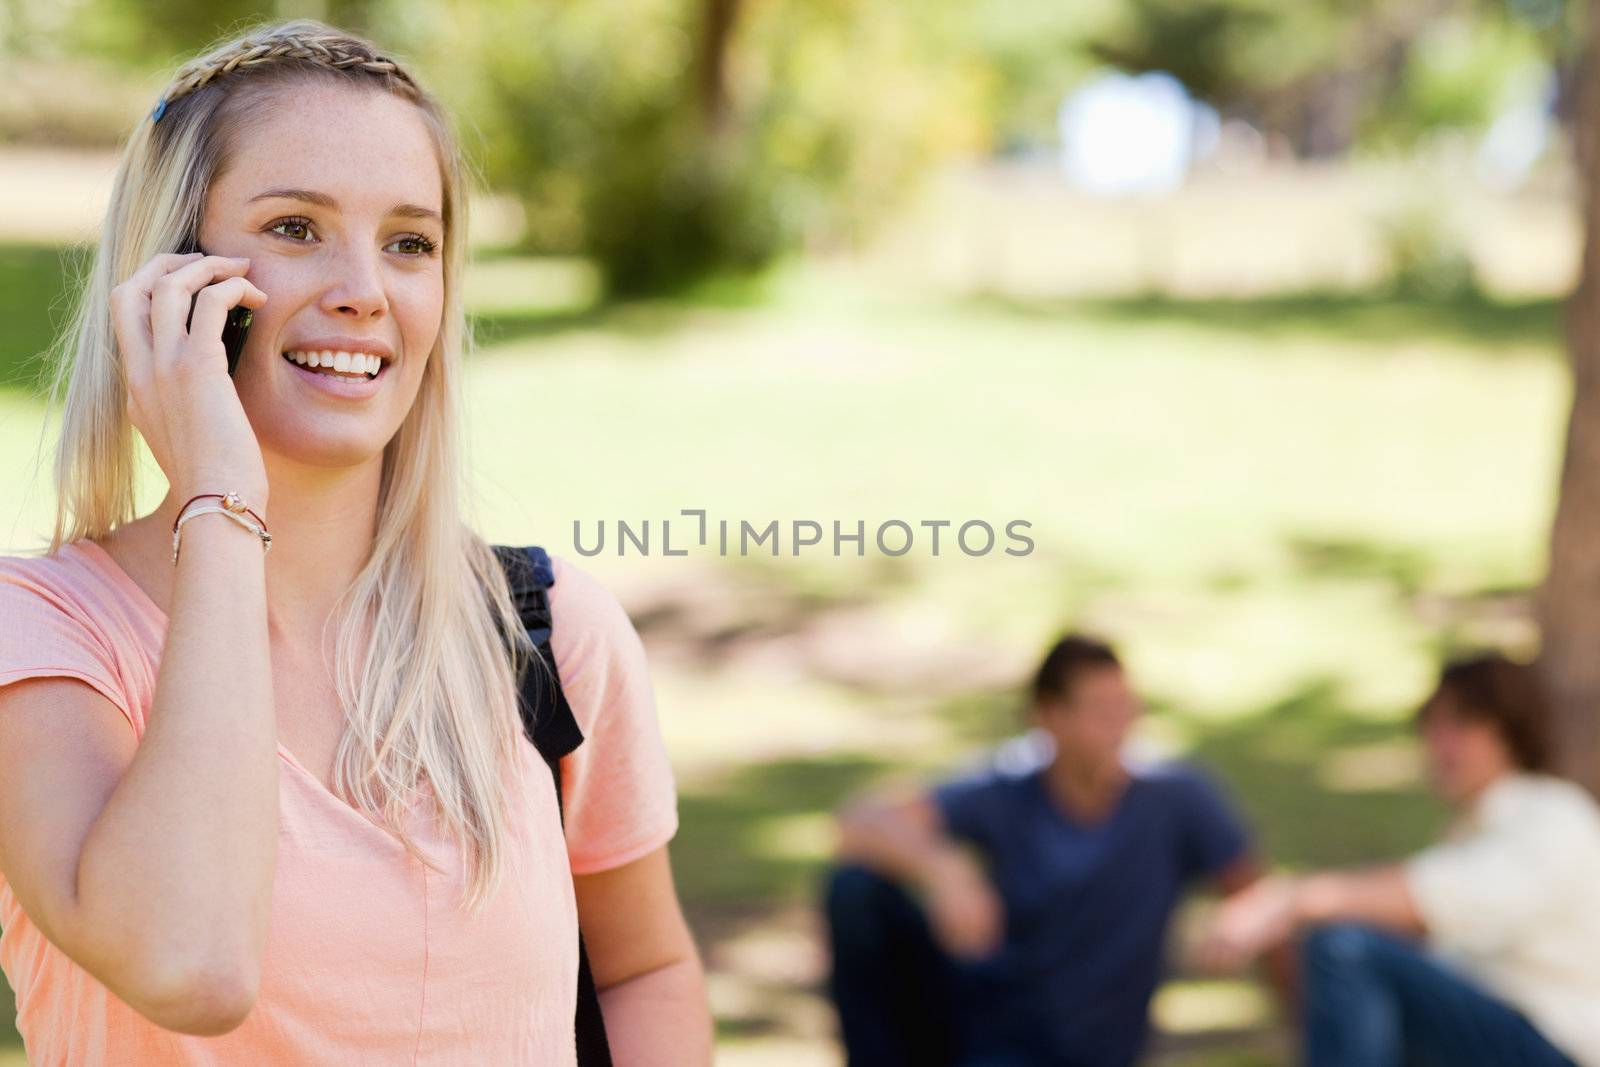 Close-up of a student on the phone in a park with friends in background